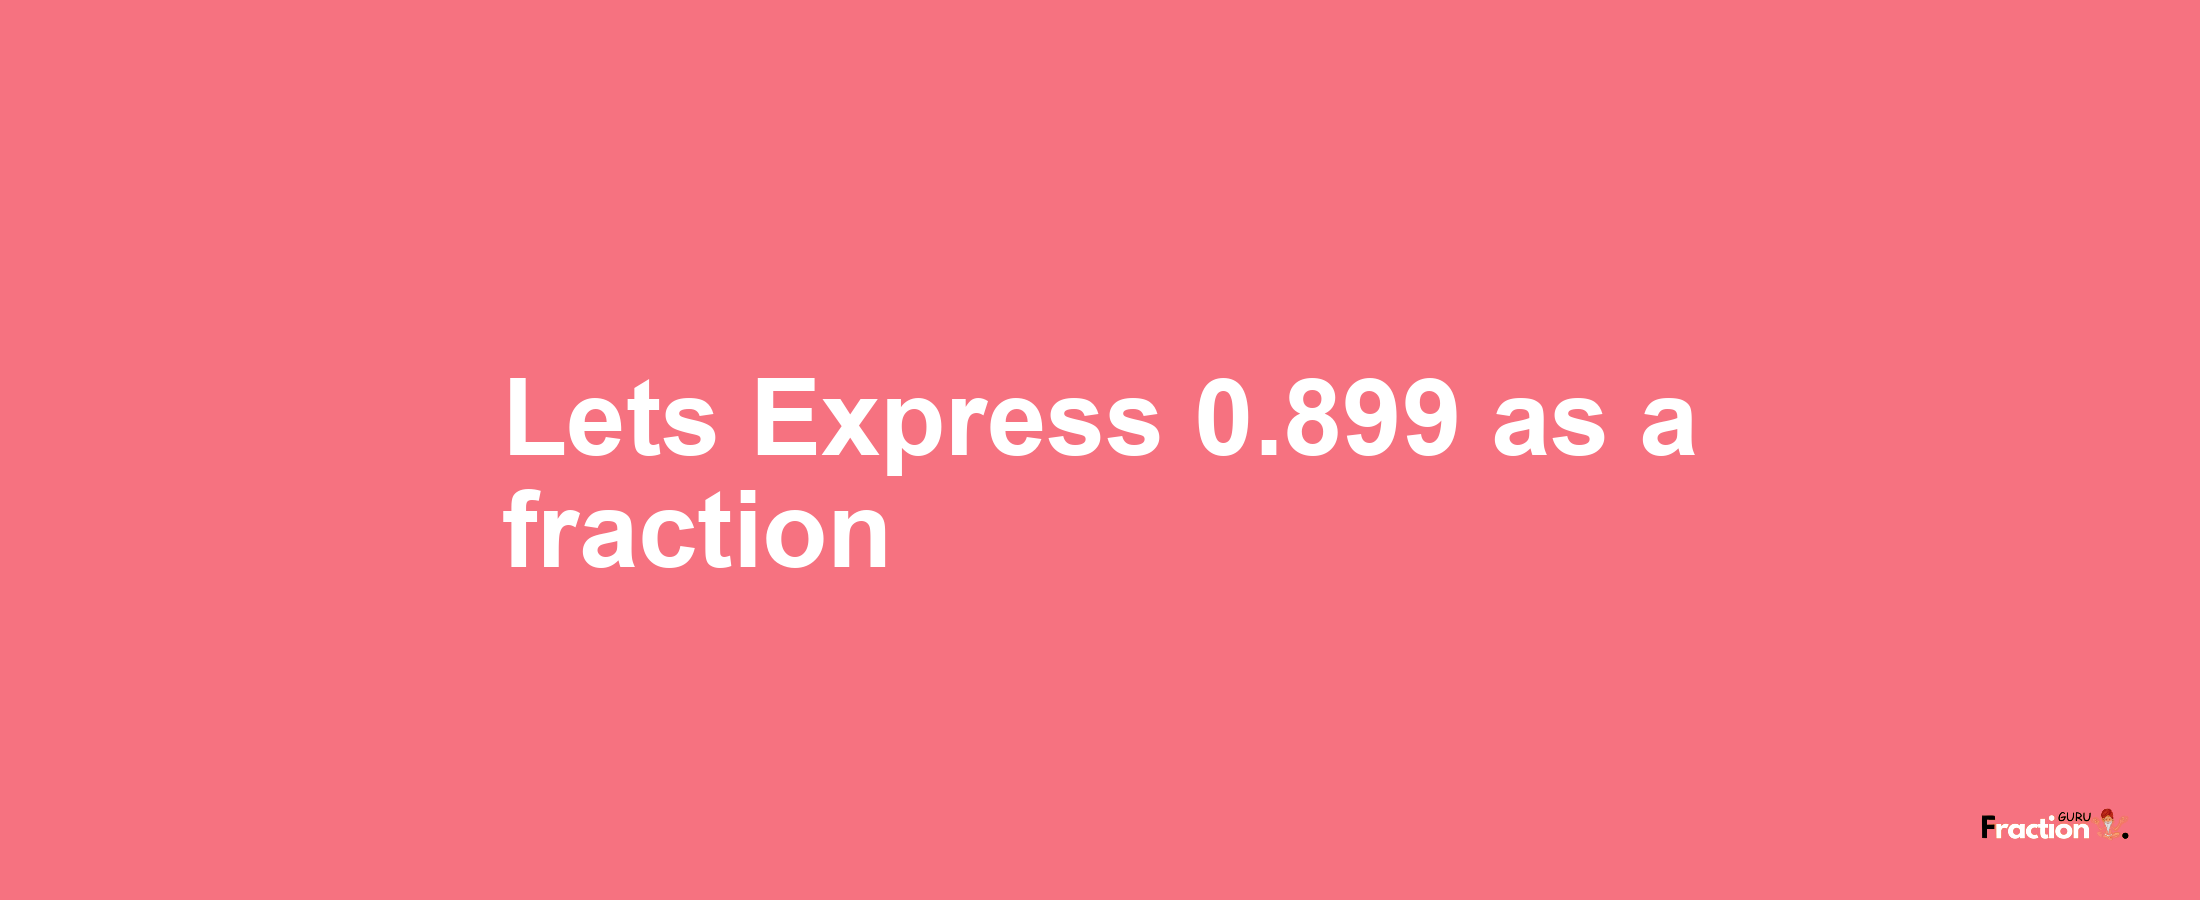 Lets Express 0.899 as afraction